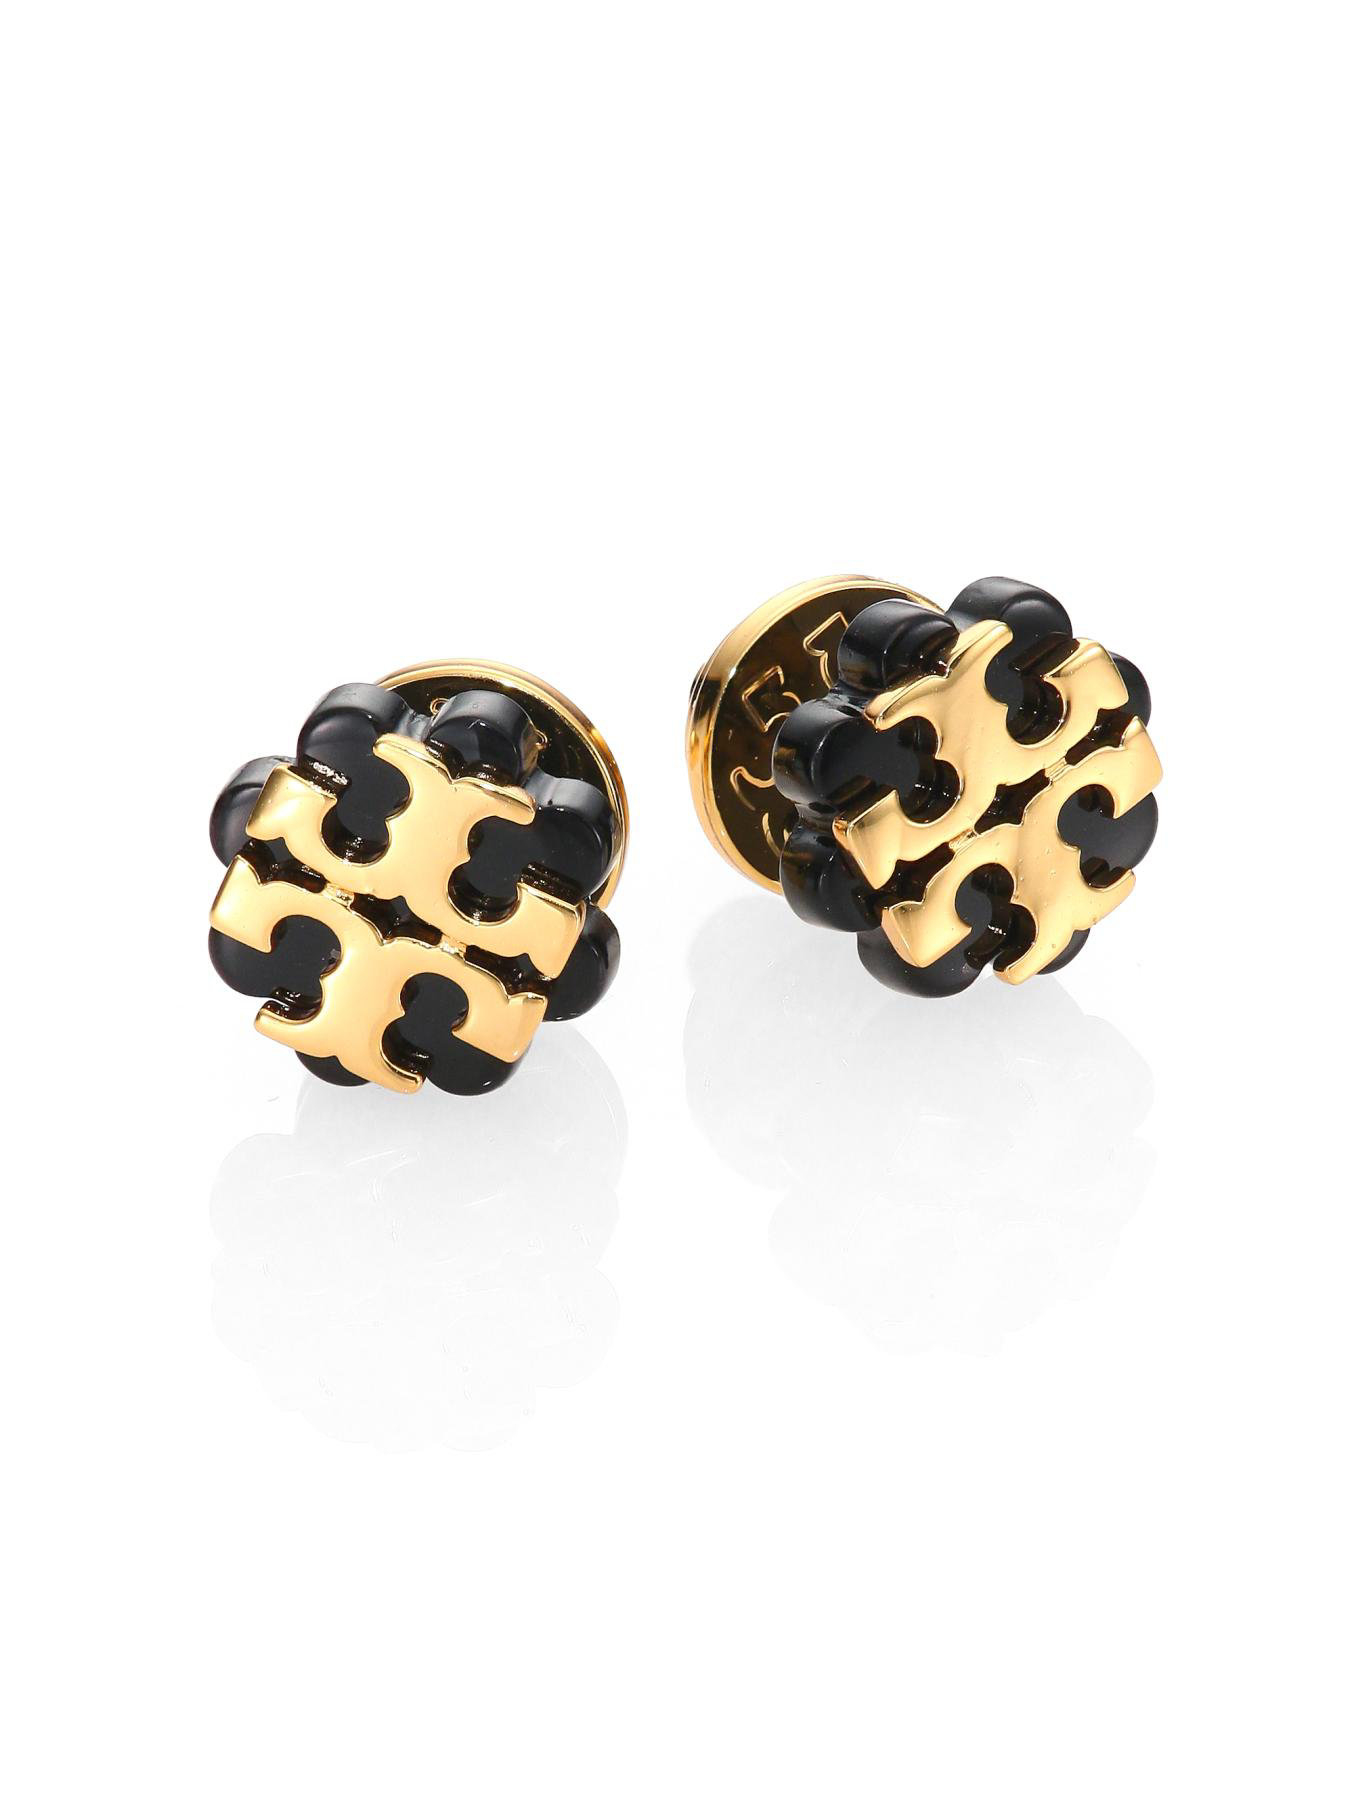 Tory Burch Earrings Black And Gold France, SAVE 46% -  